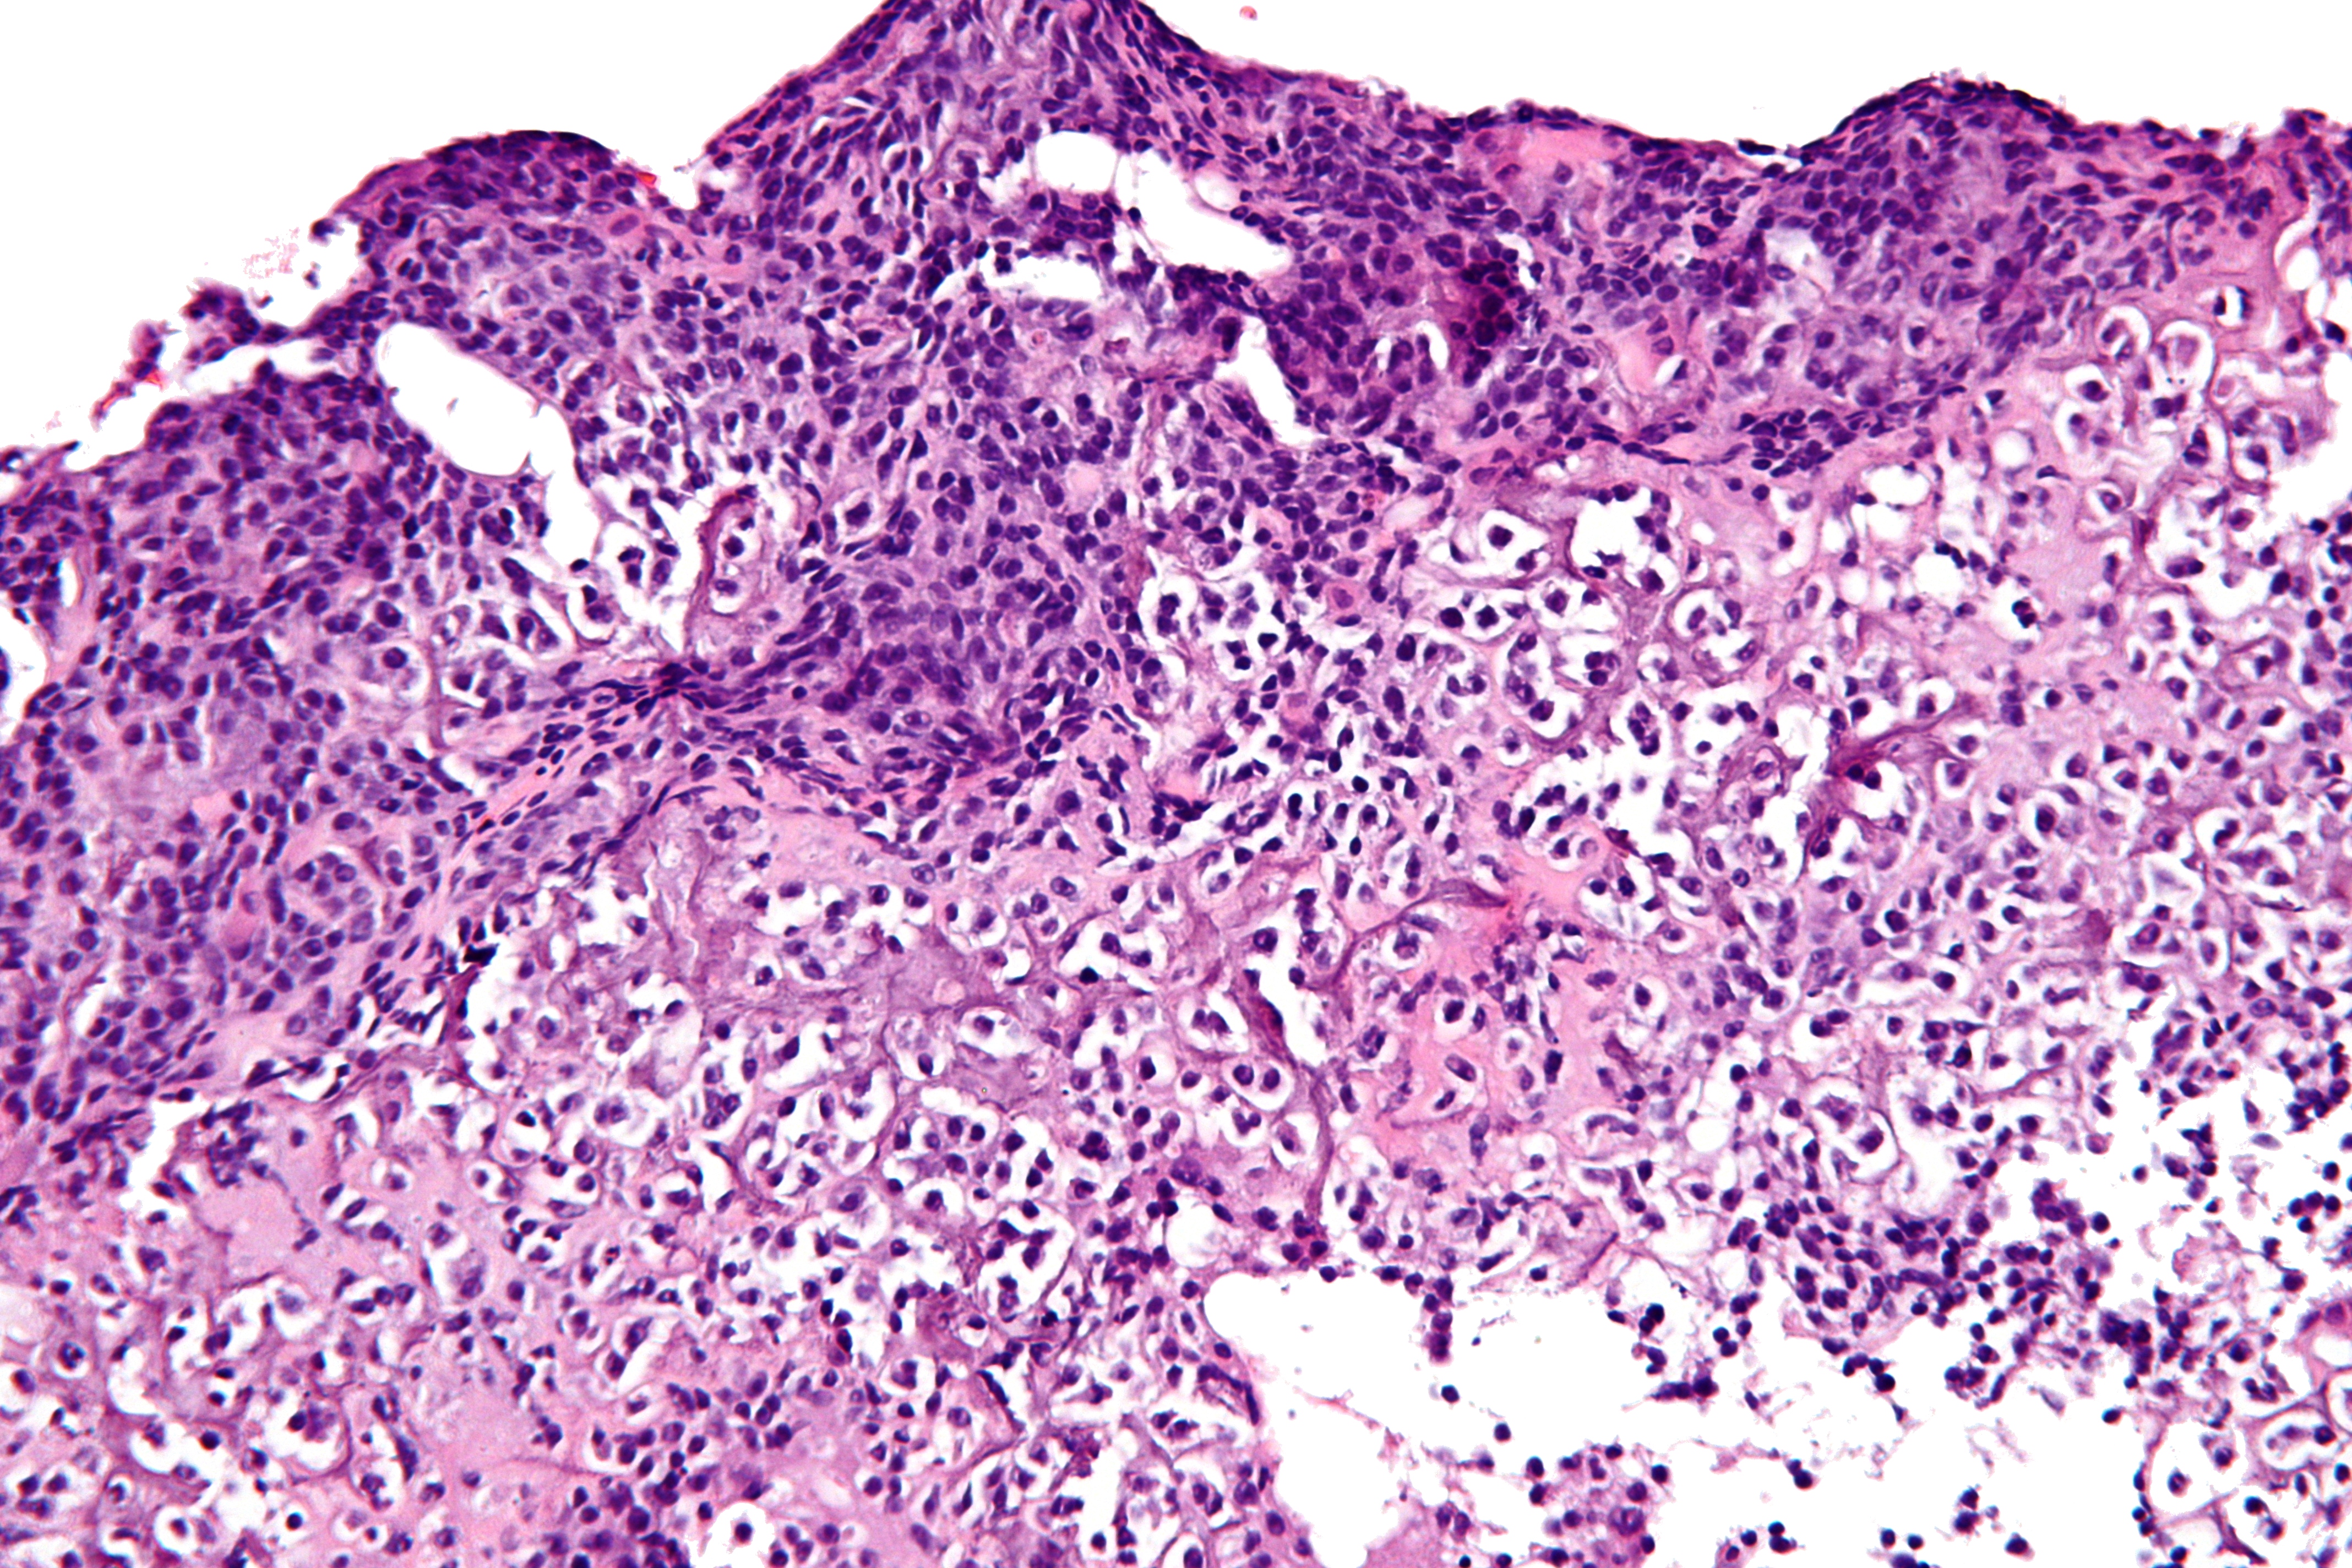 A section of bone with osteosarcoma, a type of bone cancer.